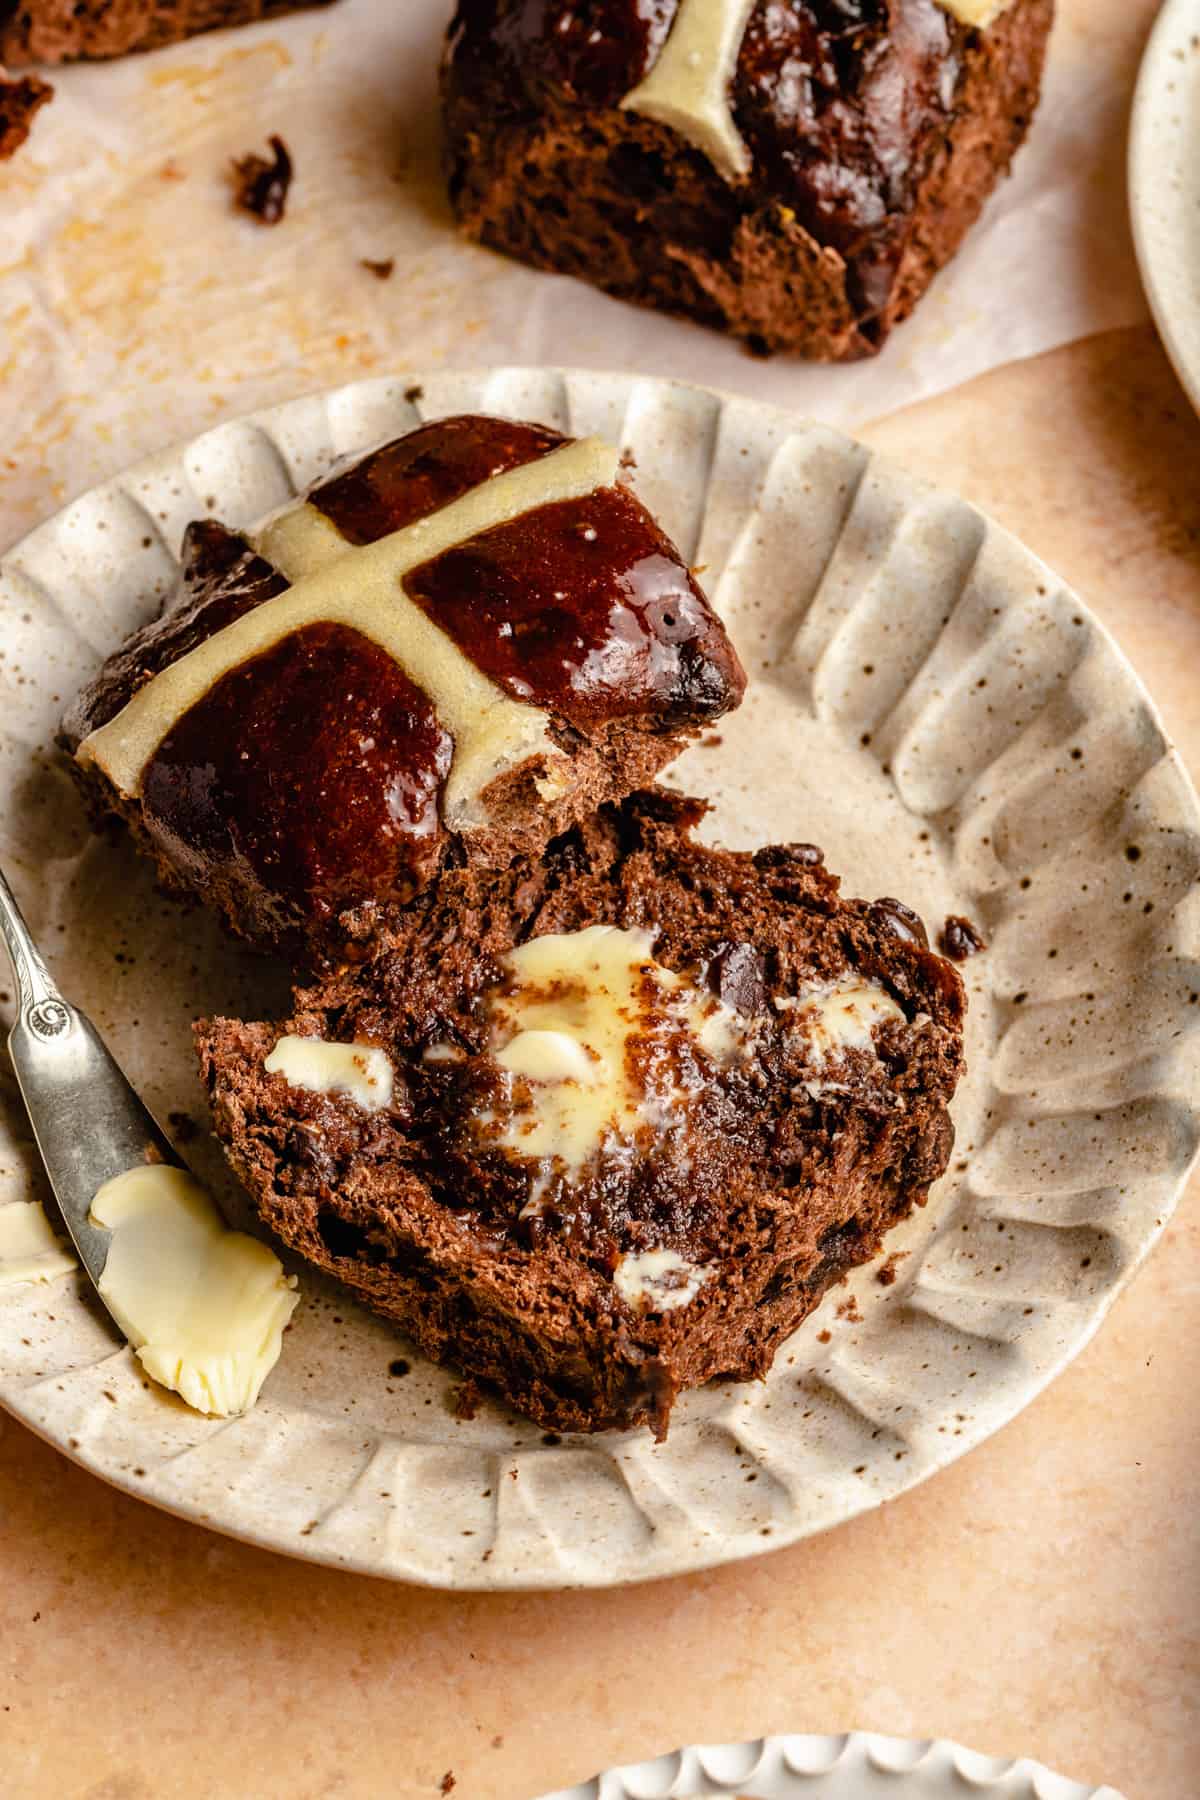 A cut open chocolate hot cross bun on a plate with a knife and butter spread on it.